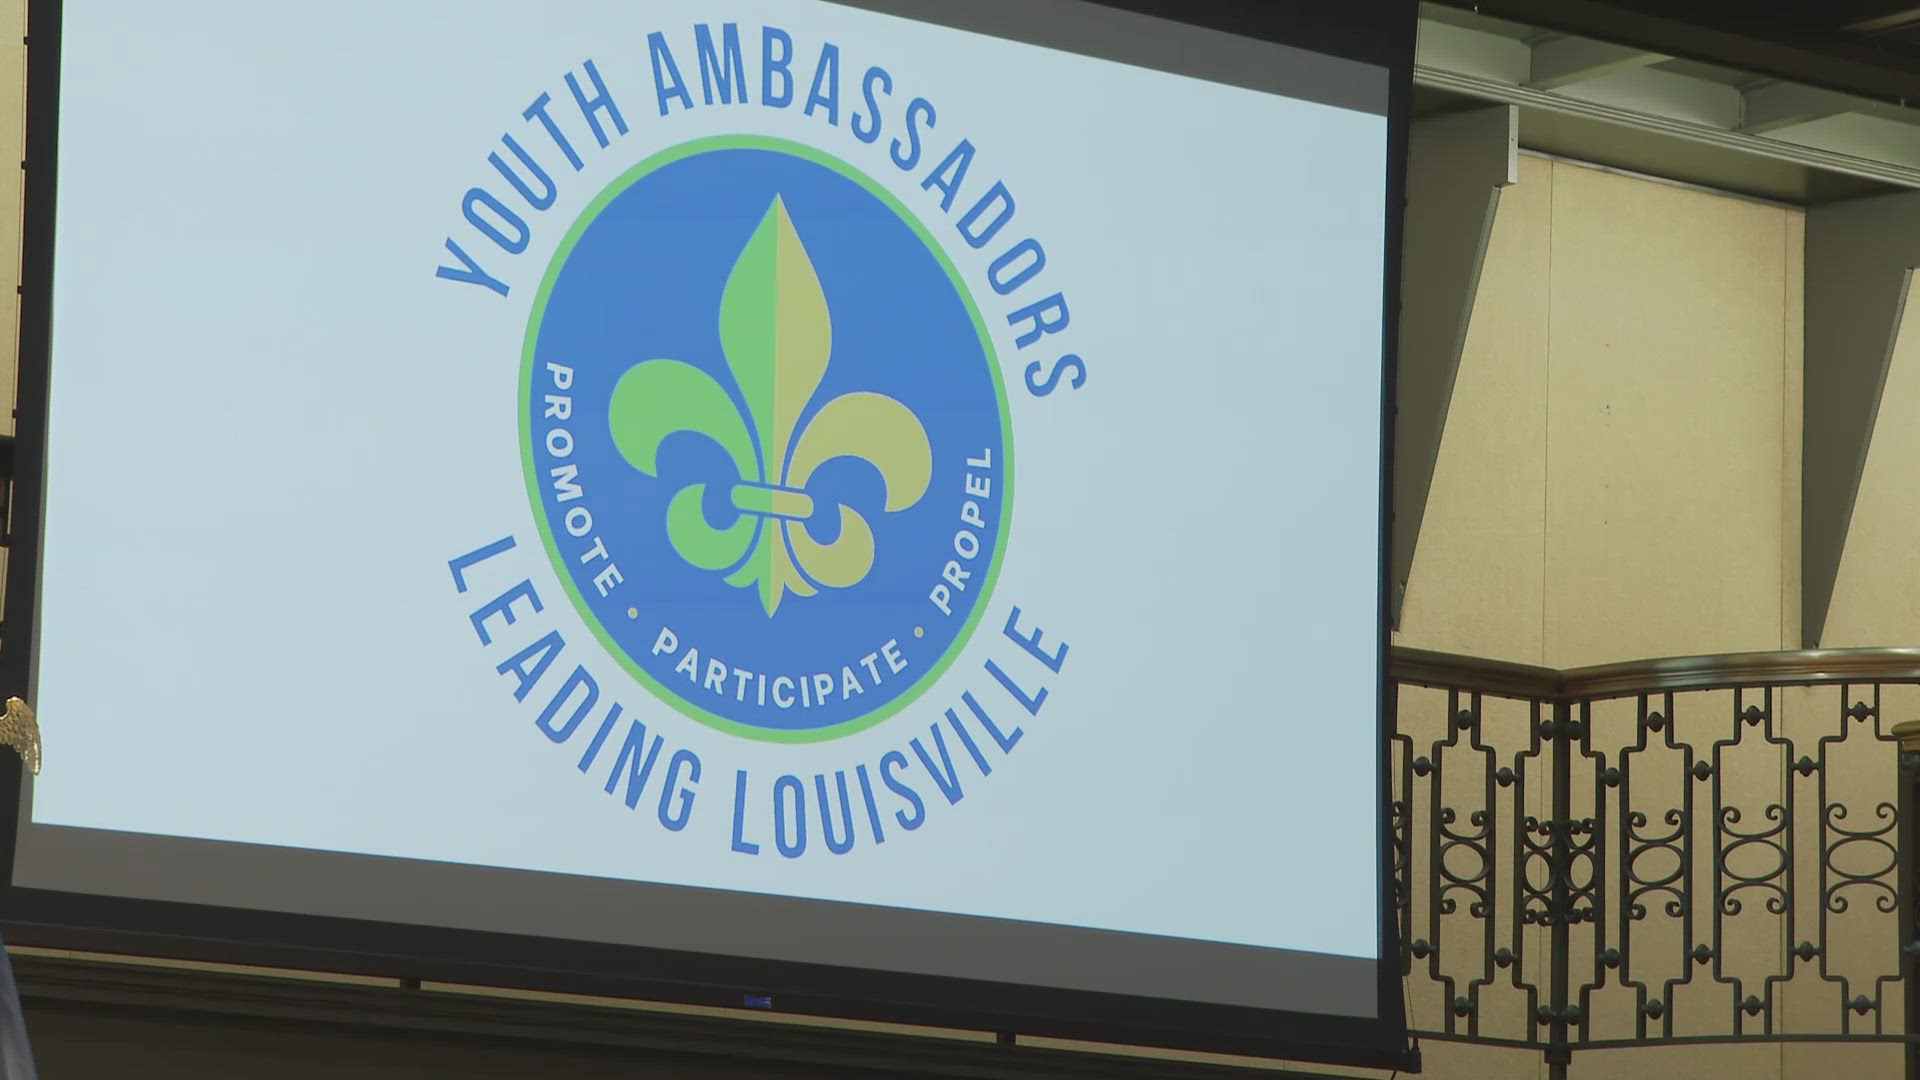 The Youth Ambassadors Leading Louisville program aims to nurture and enhance high schoolers allowing them to participate in shaping the future of Louisville events.